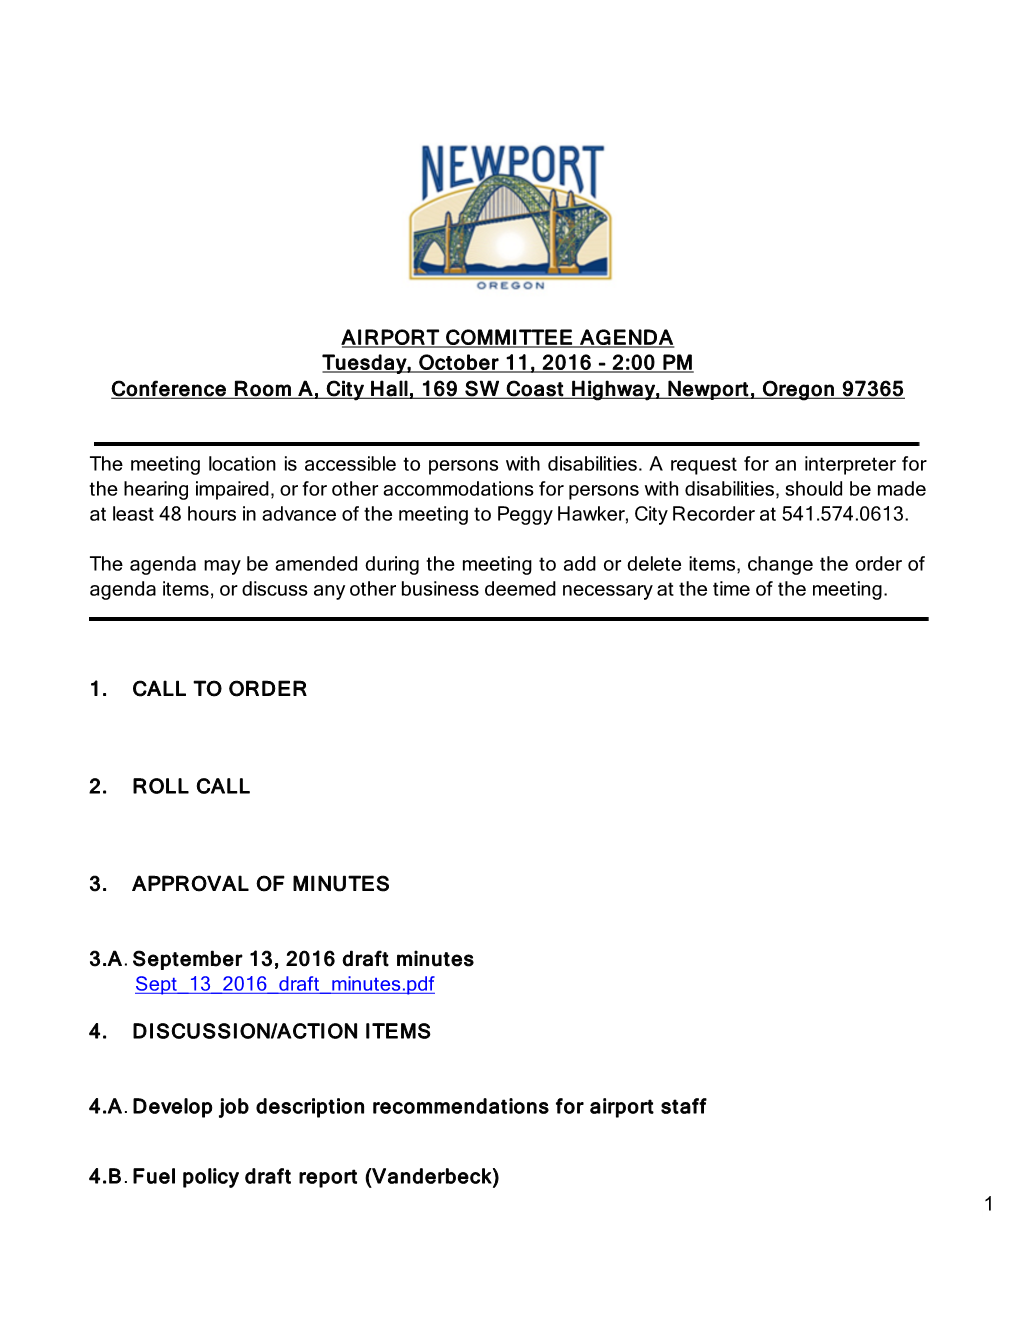 AIRPORT COMMITTEE AGENDA Tuesday, October 11, 2016 - 2:00 PM Conference Room A, City Hall, 169 SW Coast Highway, Newport, Oregon 97365